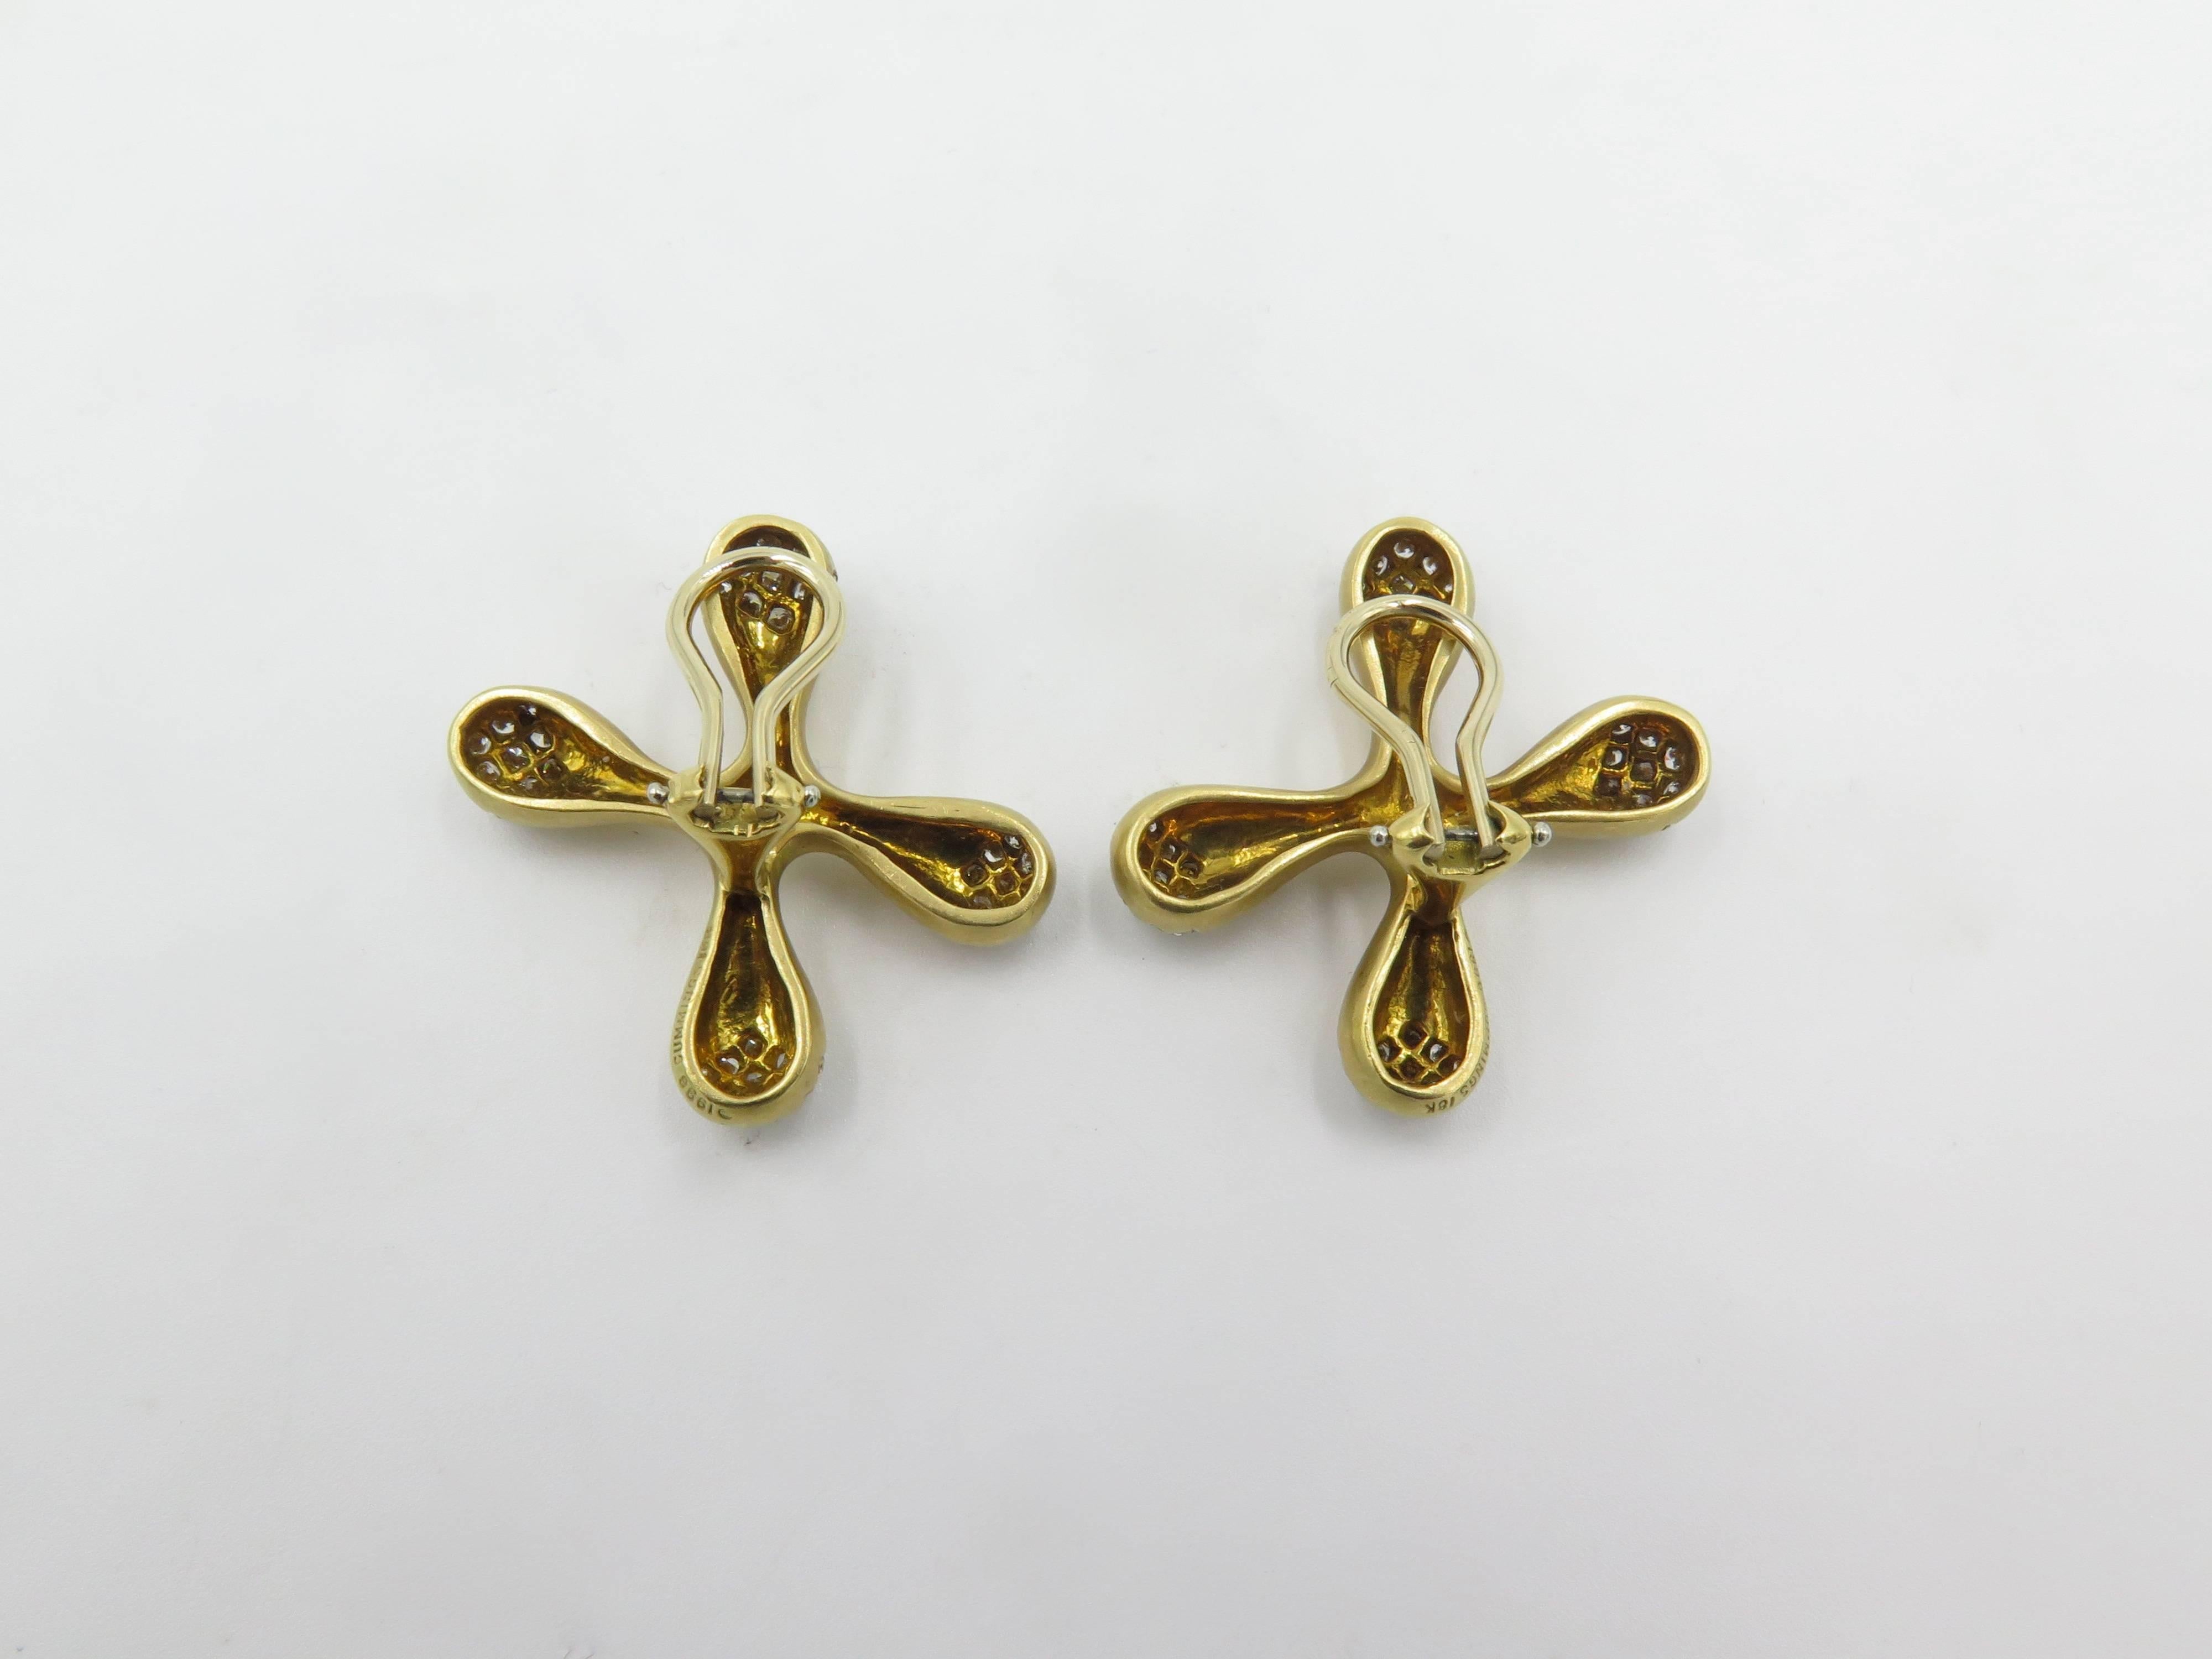 A pair of 18 karat yellow gold and diamond earrings. Angela Cummings. Each designed as a satin finish X motif, enhanced by pave set diamonds. Length is approximately 1 inch. Gross weight is approximately 18.1 grams. Stamped Angela Cummings. 18K,